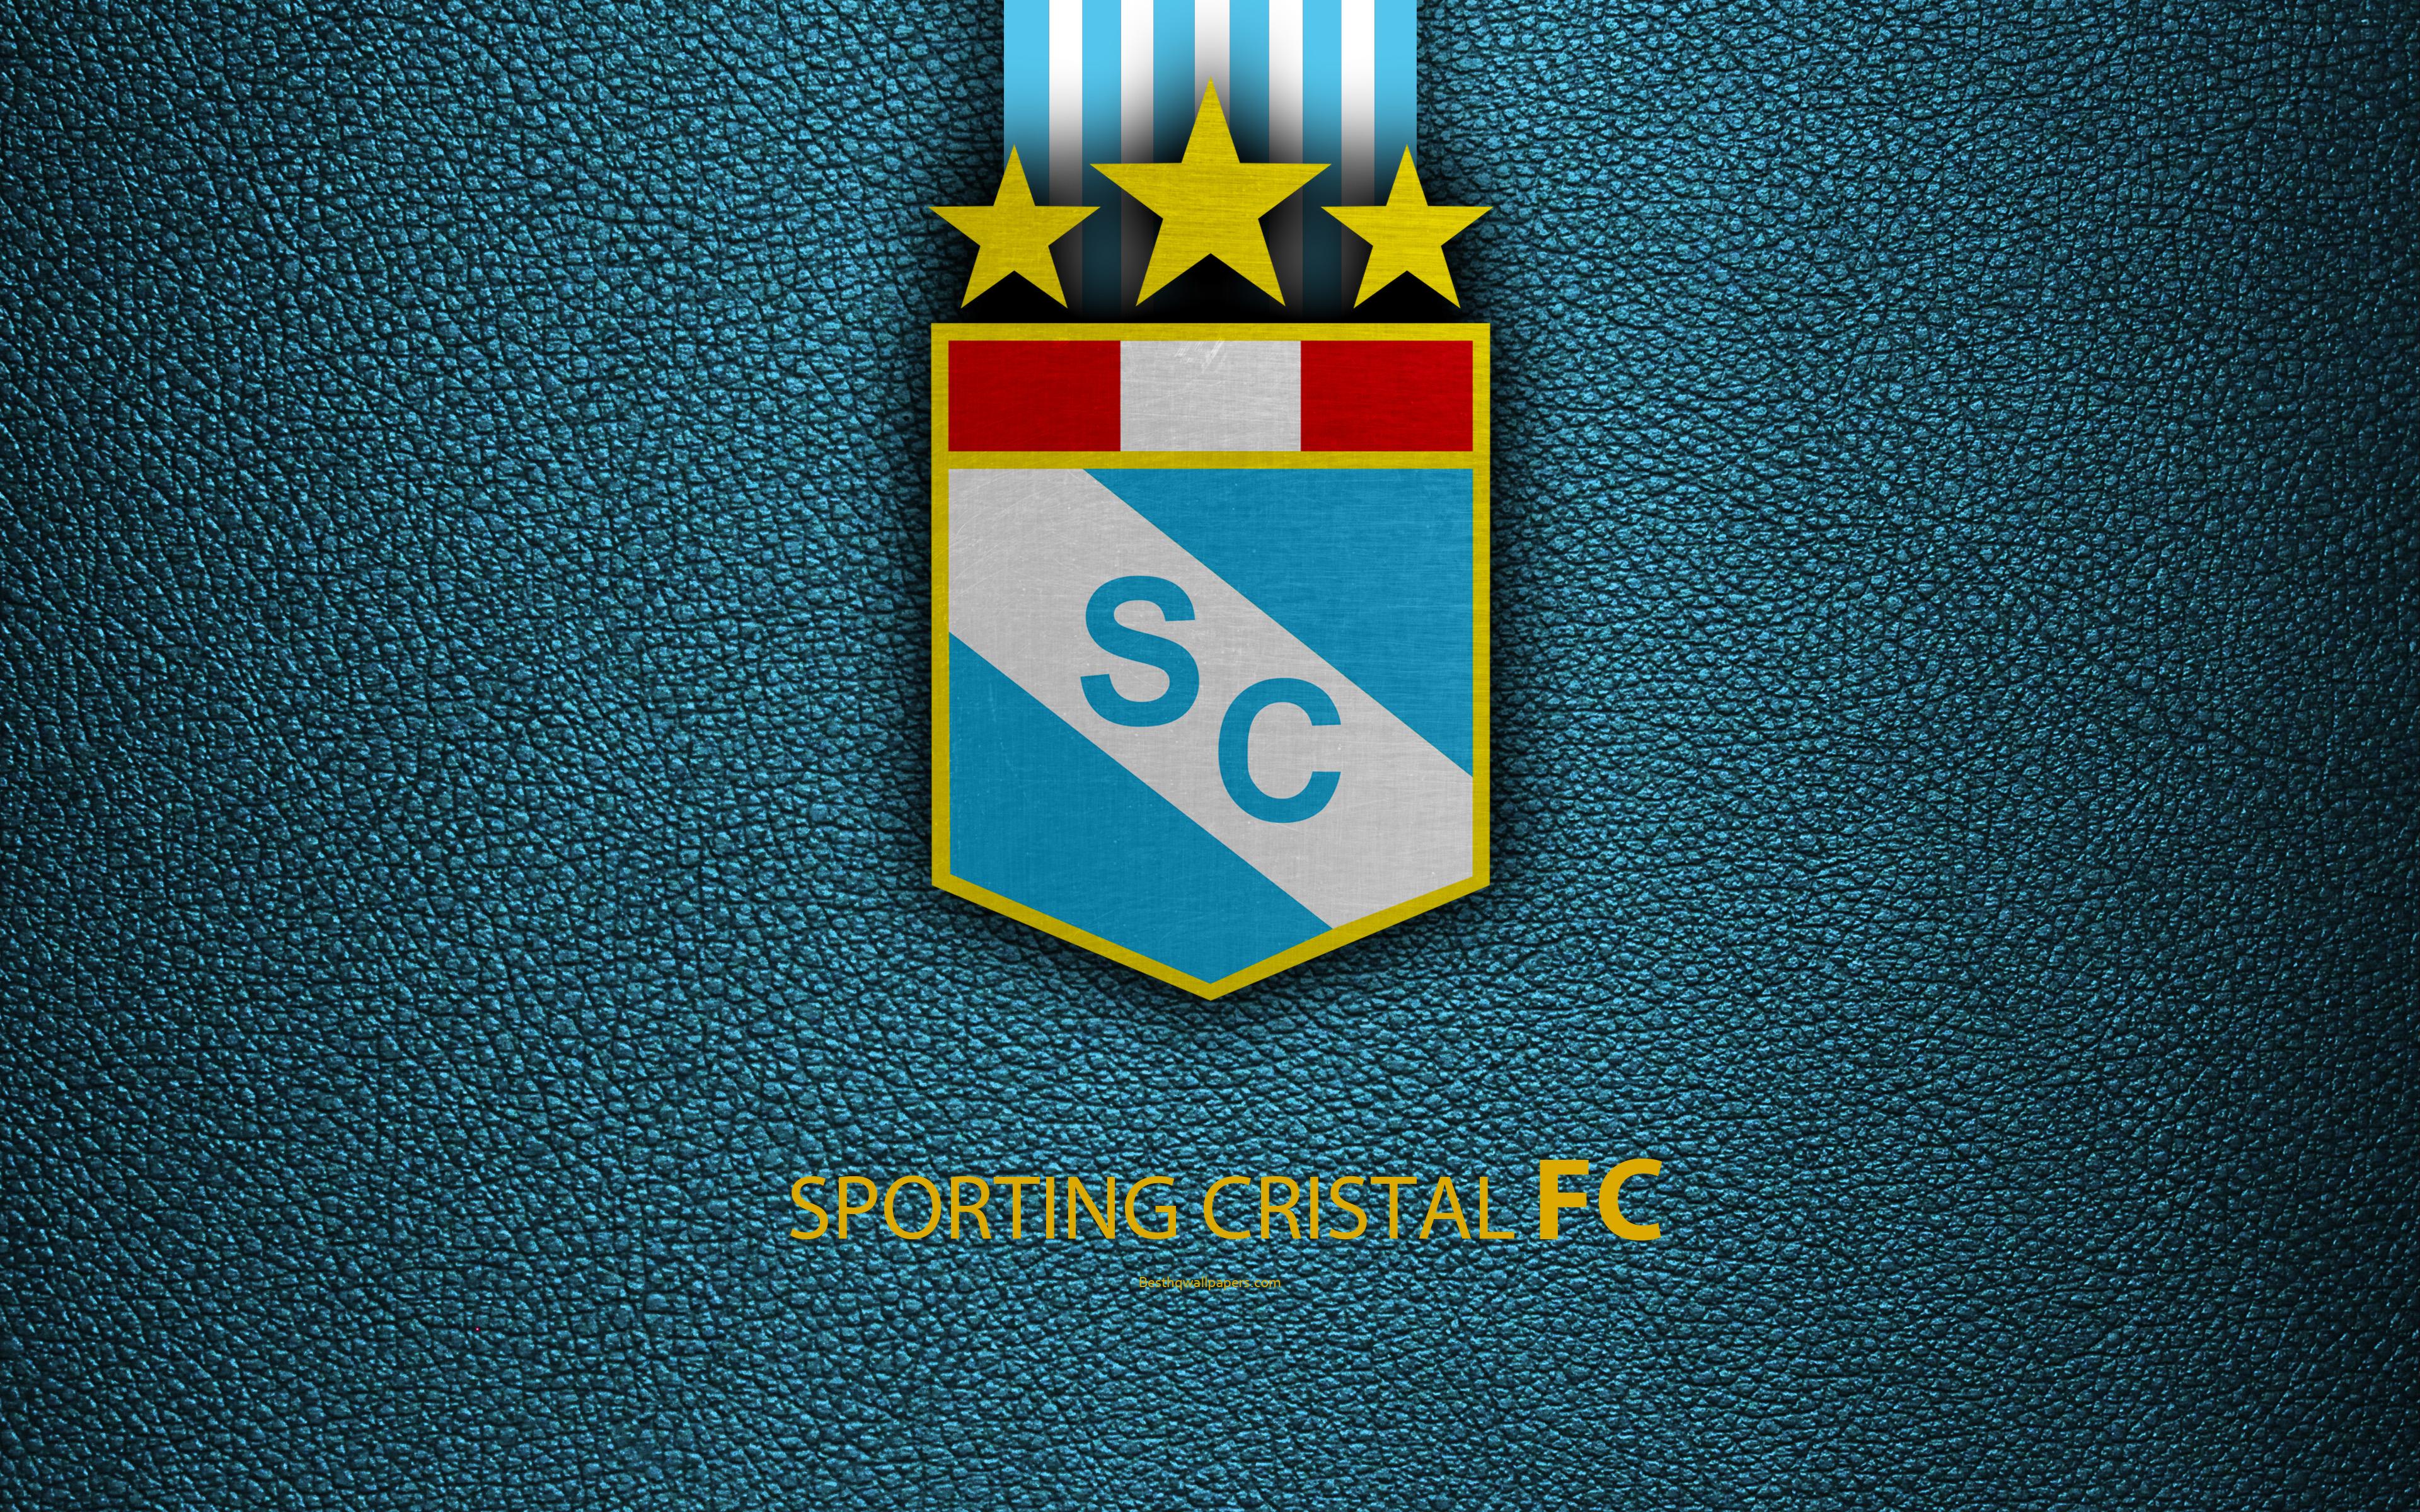 Download wallpaper Sporting Cristal FC, 4k, logo, leather texture